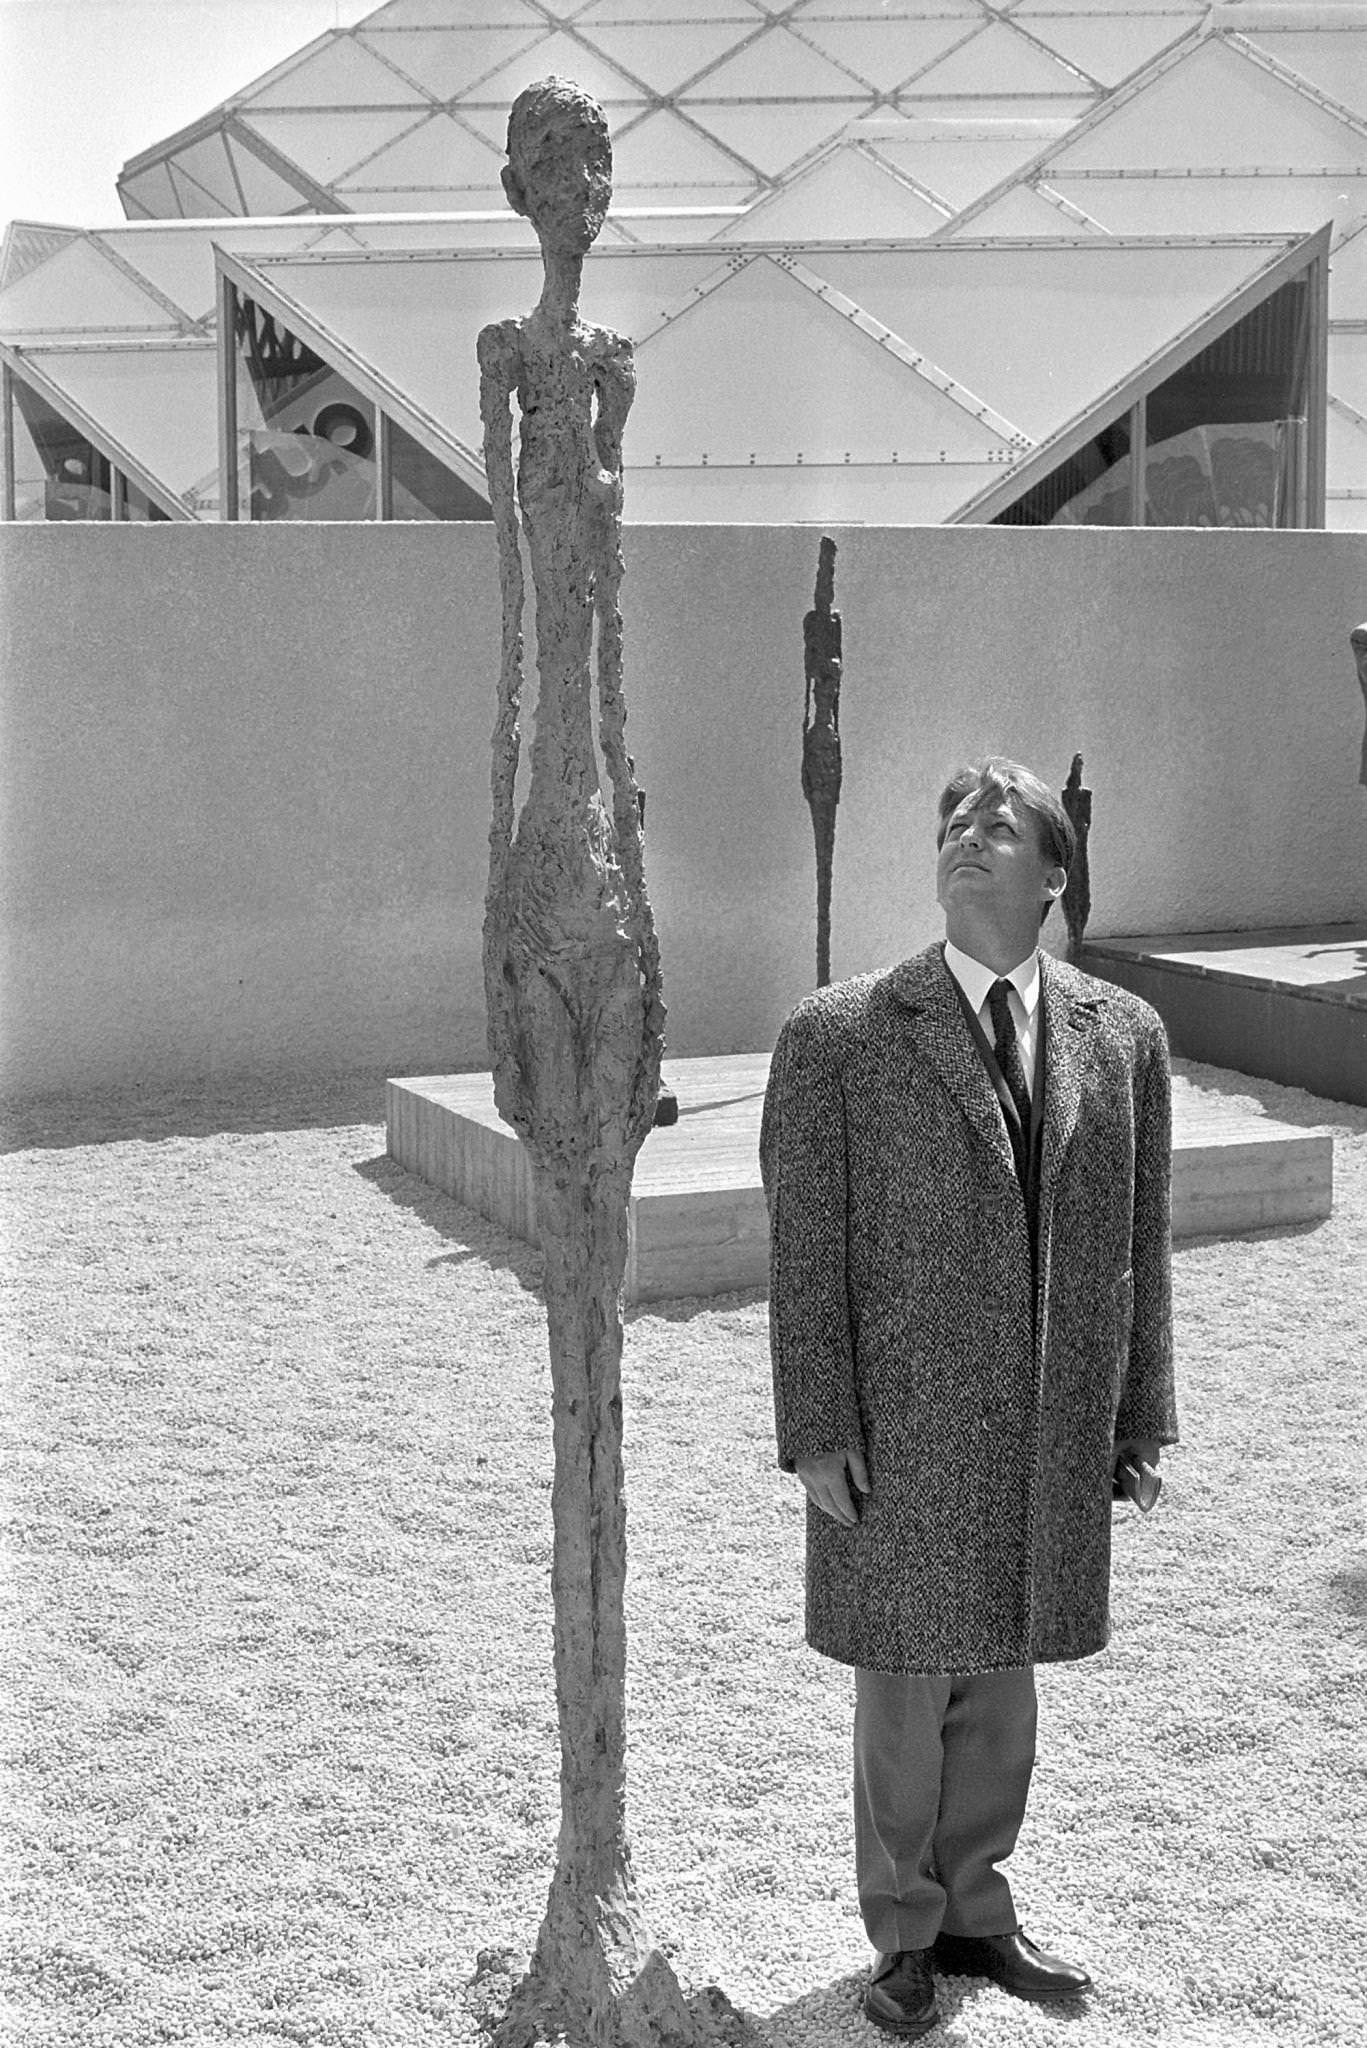 Man beside sculpture of Giacometti, Expo 1967